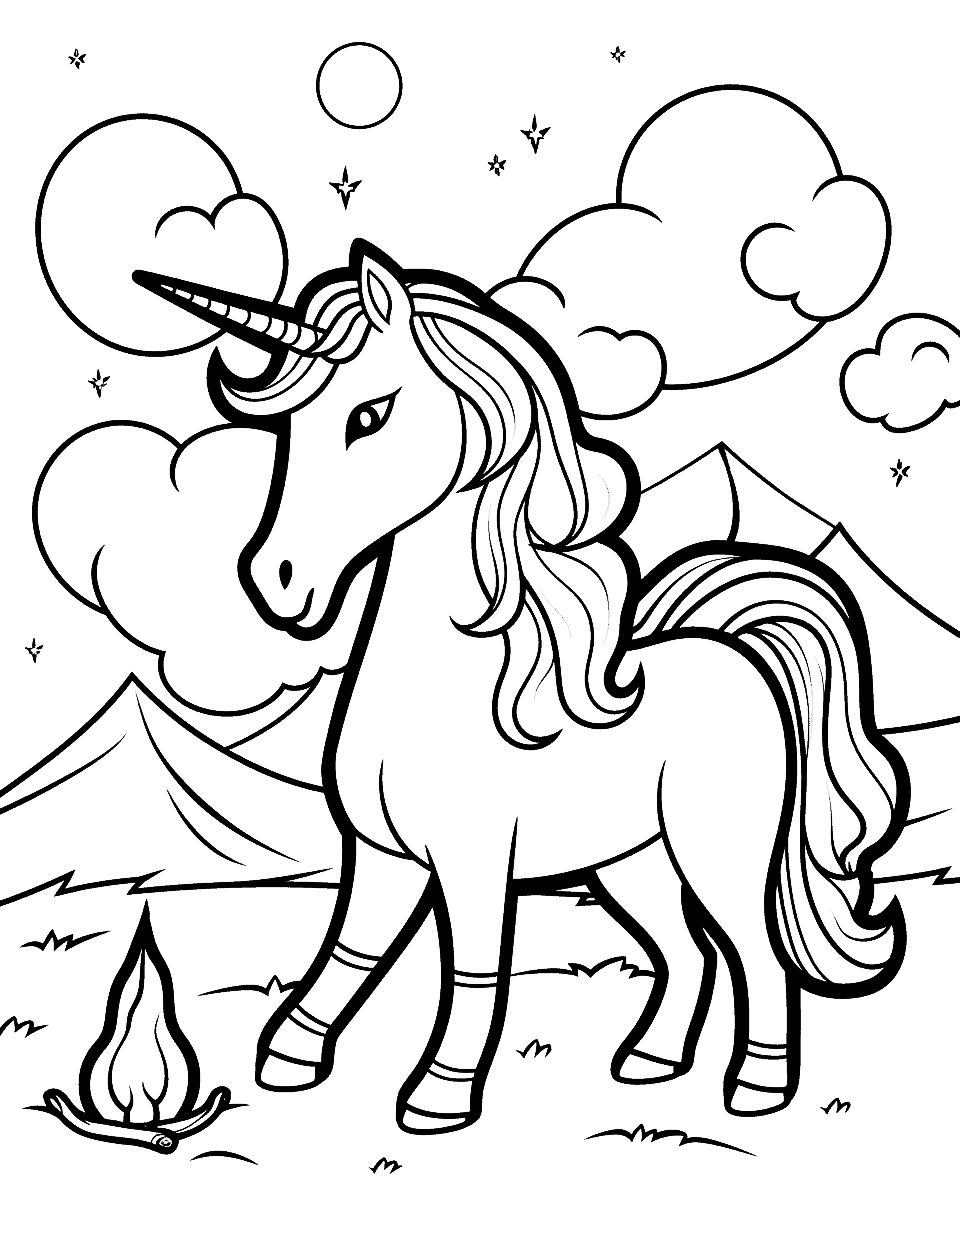 Unicorn Campfire Coloring Page - A unicorn standing around a campfire with a night sky and tents in the background.